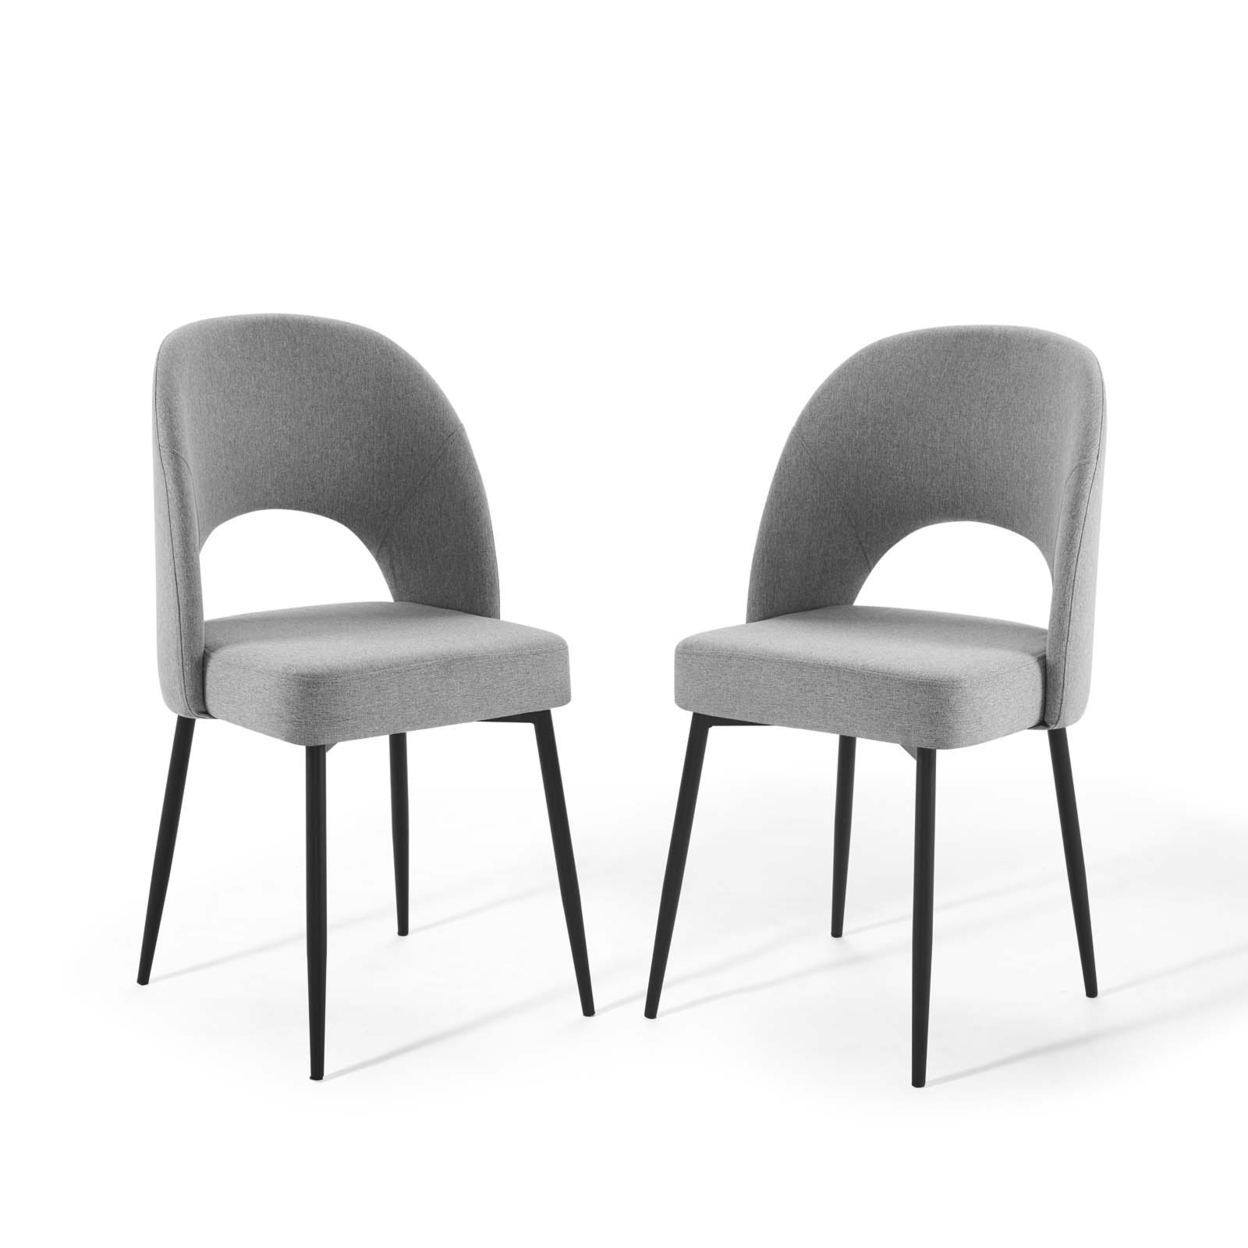 Rouse Dining Side Chair Upholstered Fabric Set Of 2, Black Light Gray